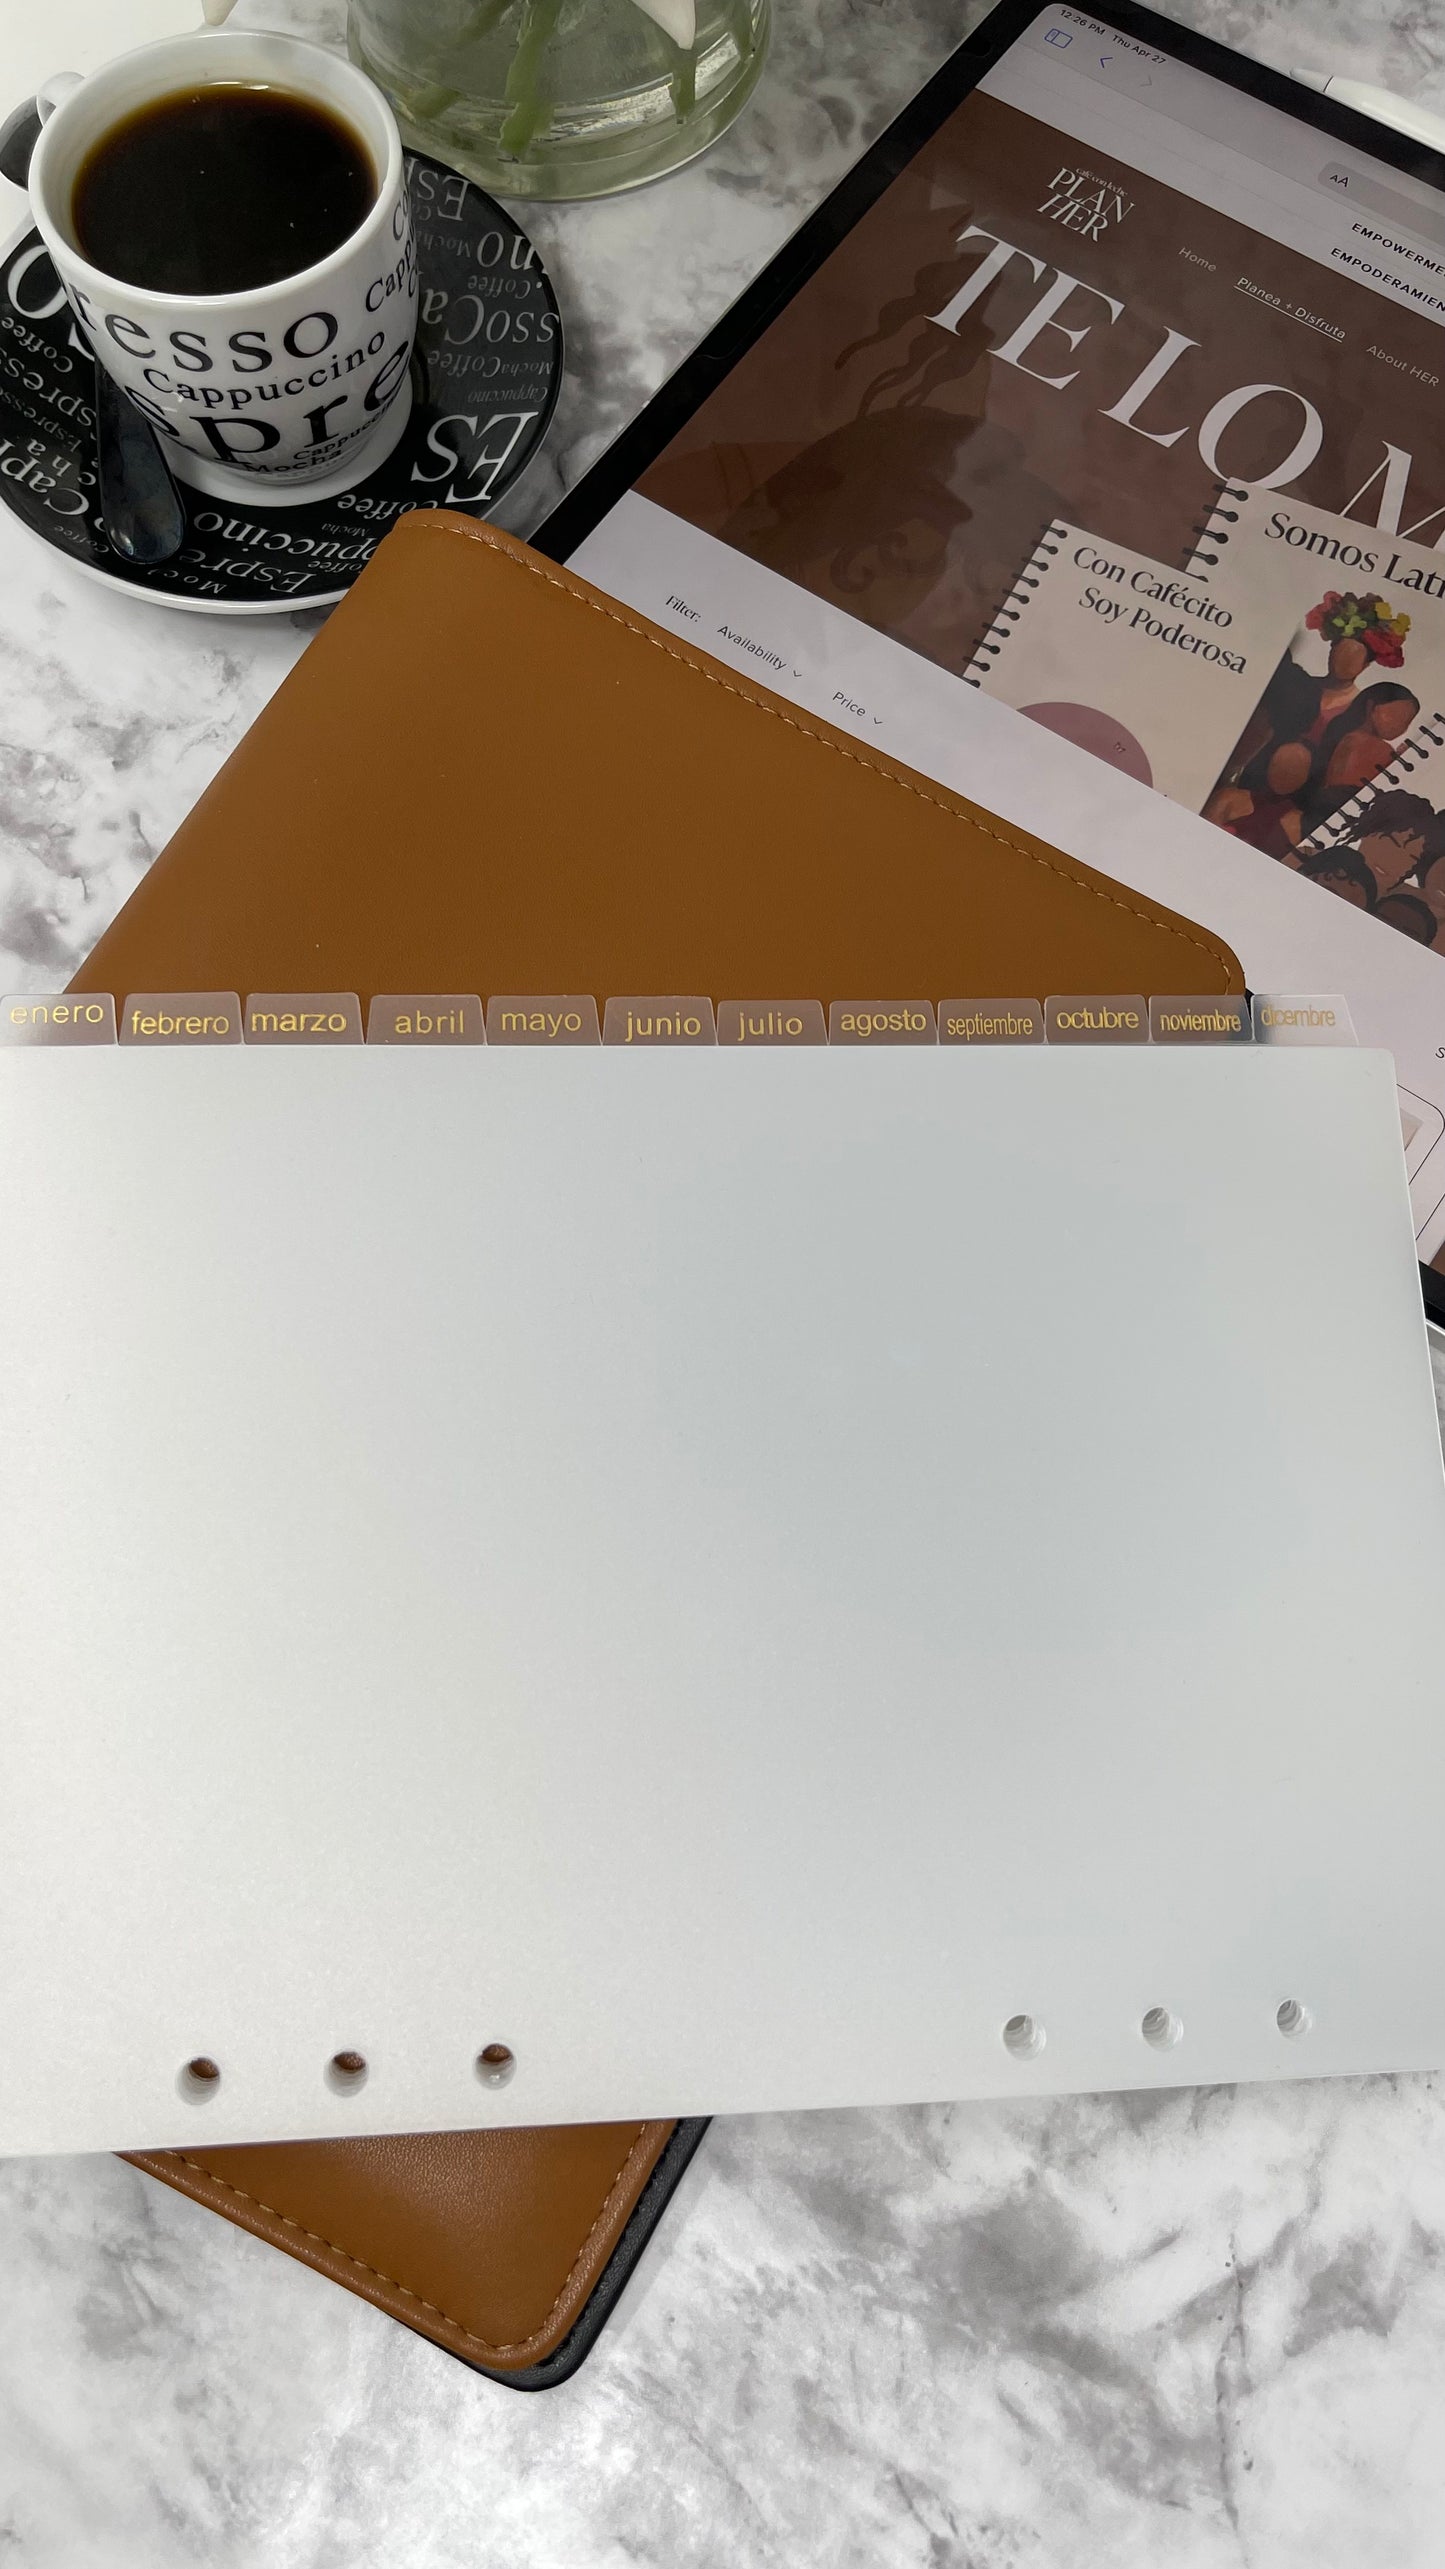 This 12-month divider is perfect for staying organized. The months are printed in plastic both gold and Spanish, on clear frosted plastic . The divider is perfect for filing and organizing documents, and can be easily placed in any A5 binder or folder. The clear frosted plastic adds a subtle, stylish look while ensuring the divider won't take away from the look of your documents.